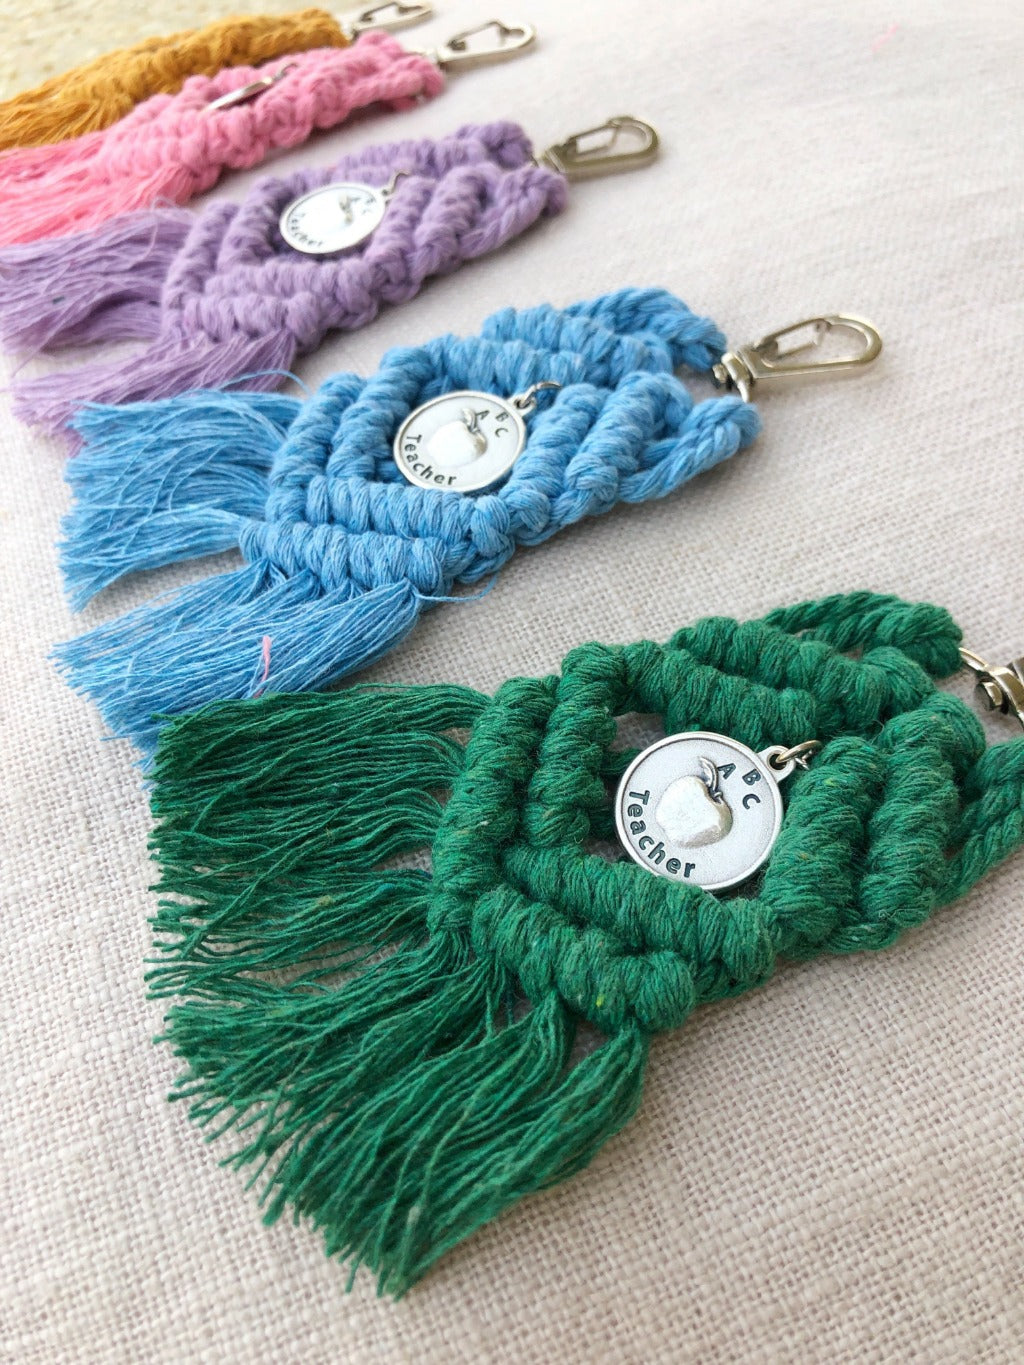 boho macrame keychains in mustard, pink, purple, blue, and green